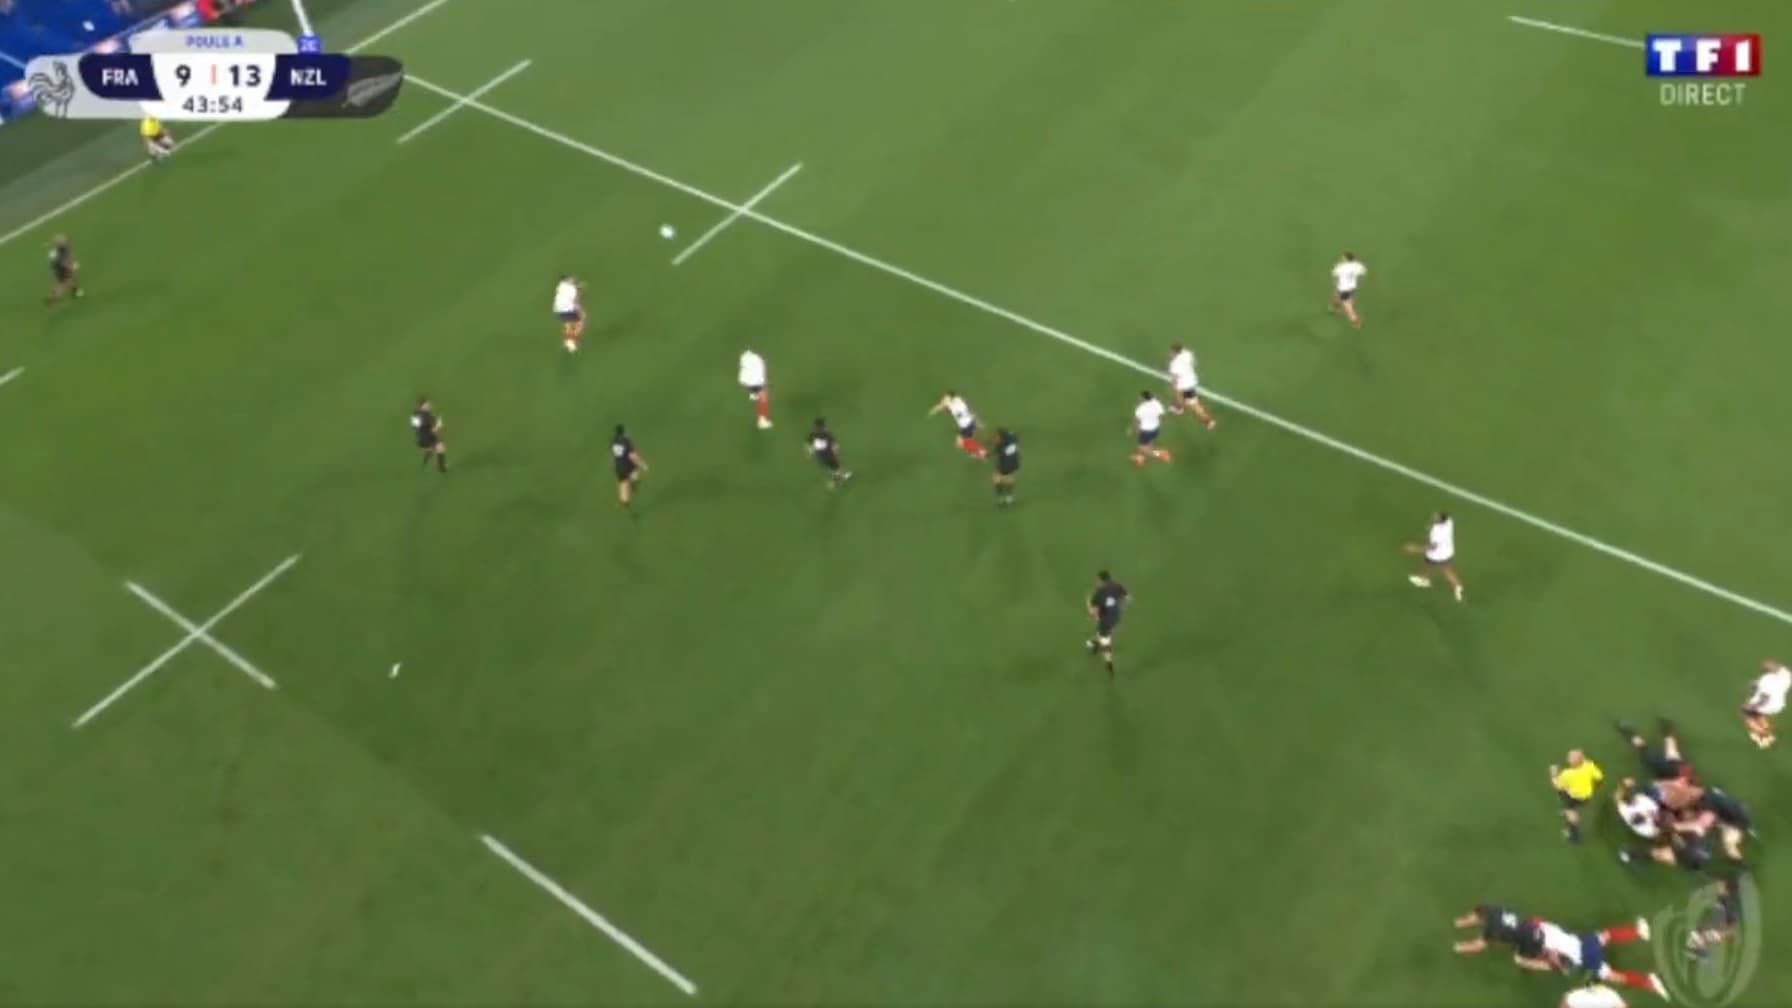 Should the referee have rejected the All Blacks striker's second attempt?